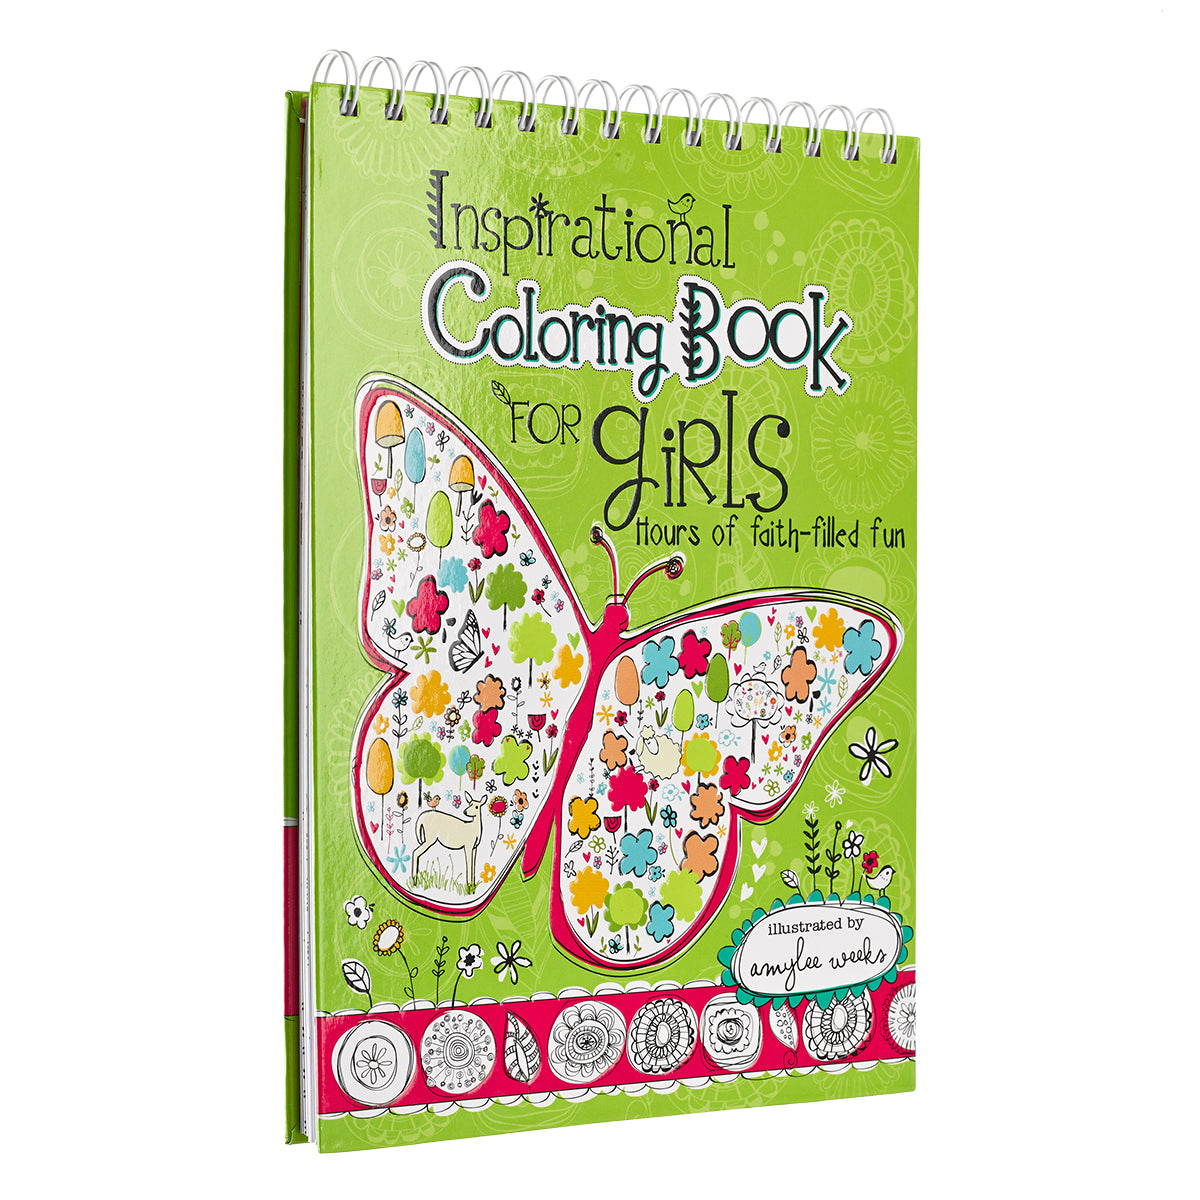 Inspirational Coloring Book For Girls - The Christian Gift Company